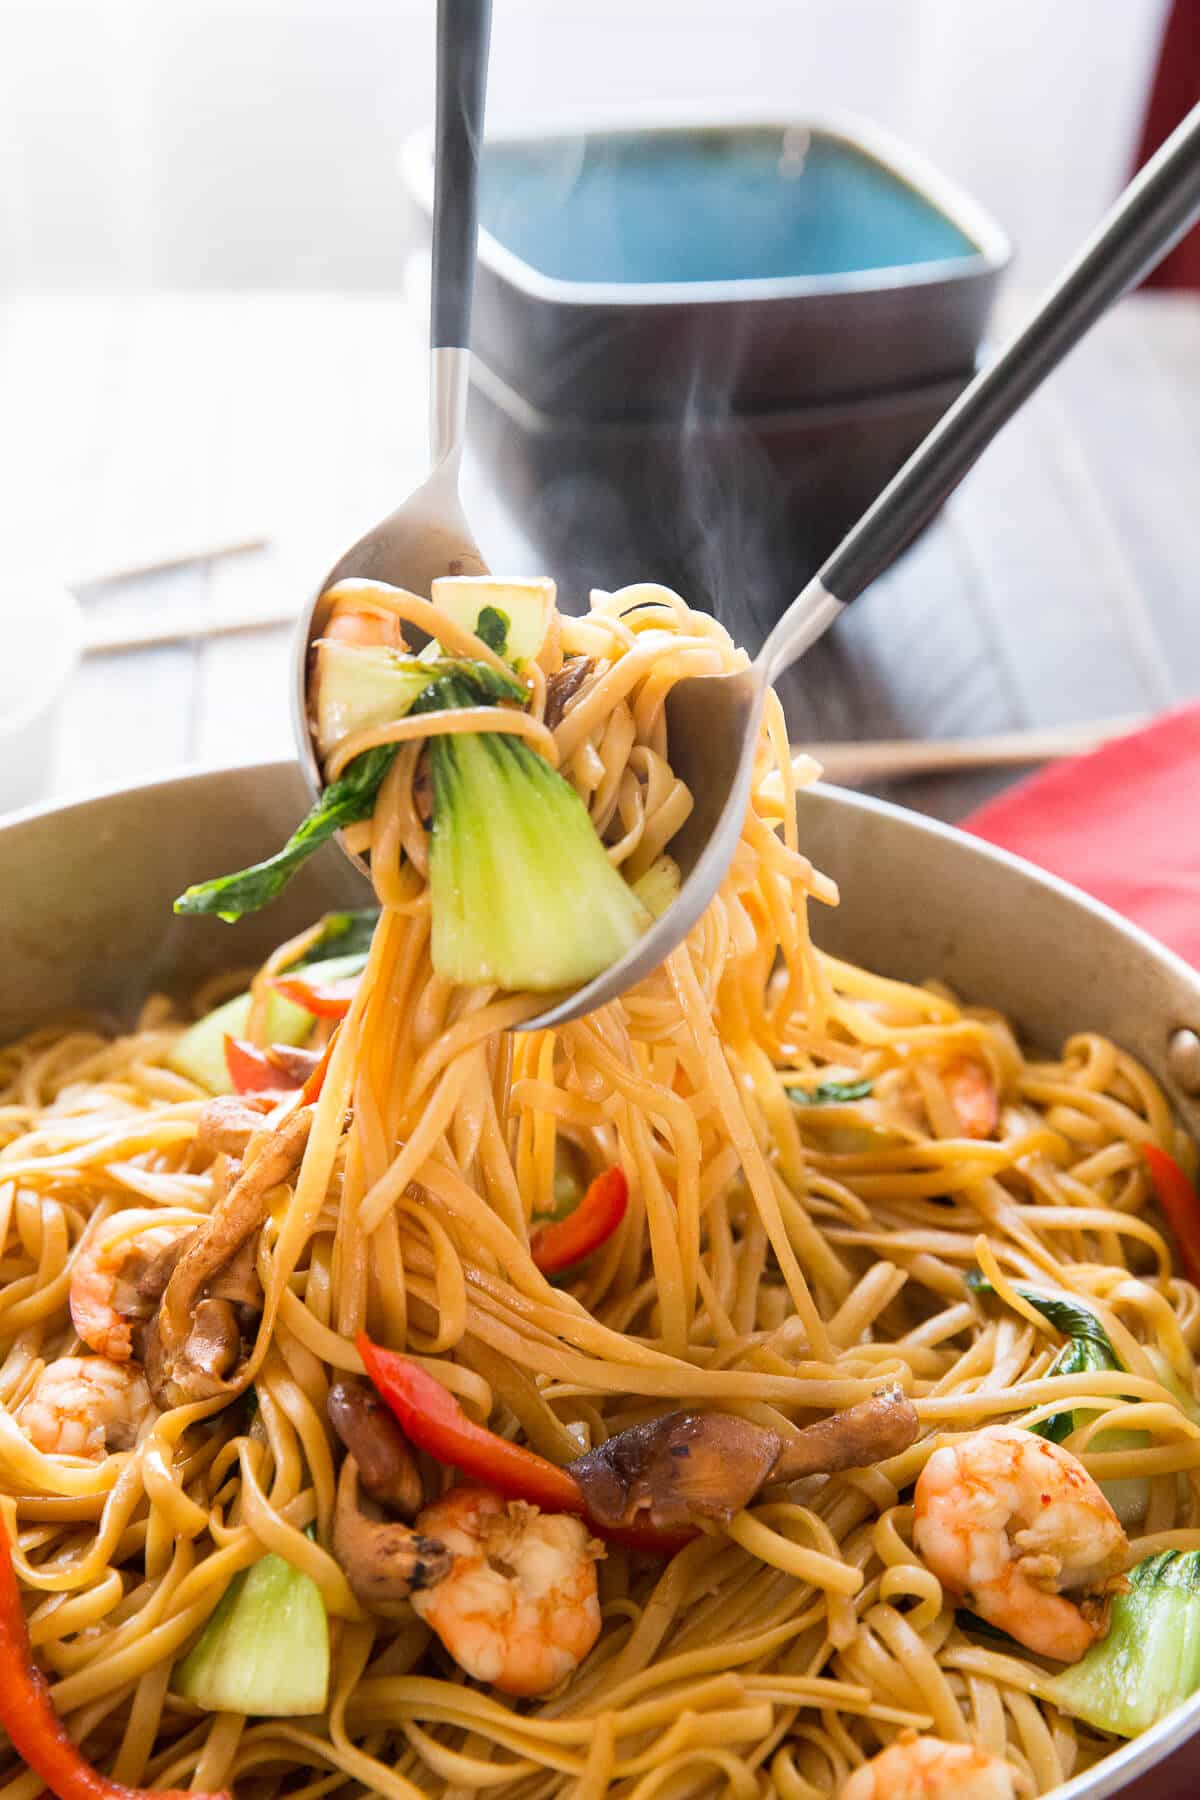 Shrimp Lo Mein is a dish that combines ease and flavor! Saucy noodles, vegetables, and shrimp make take out a thing of the past!